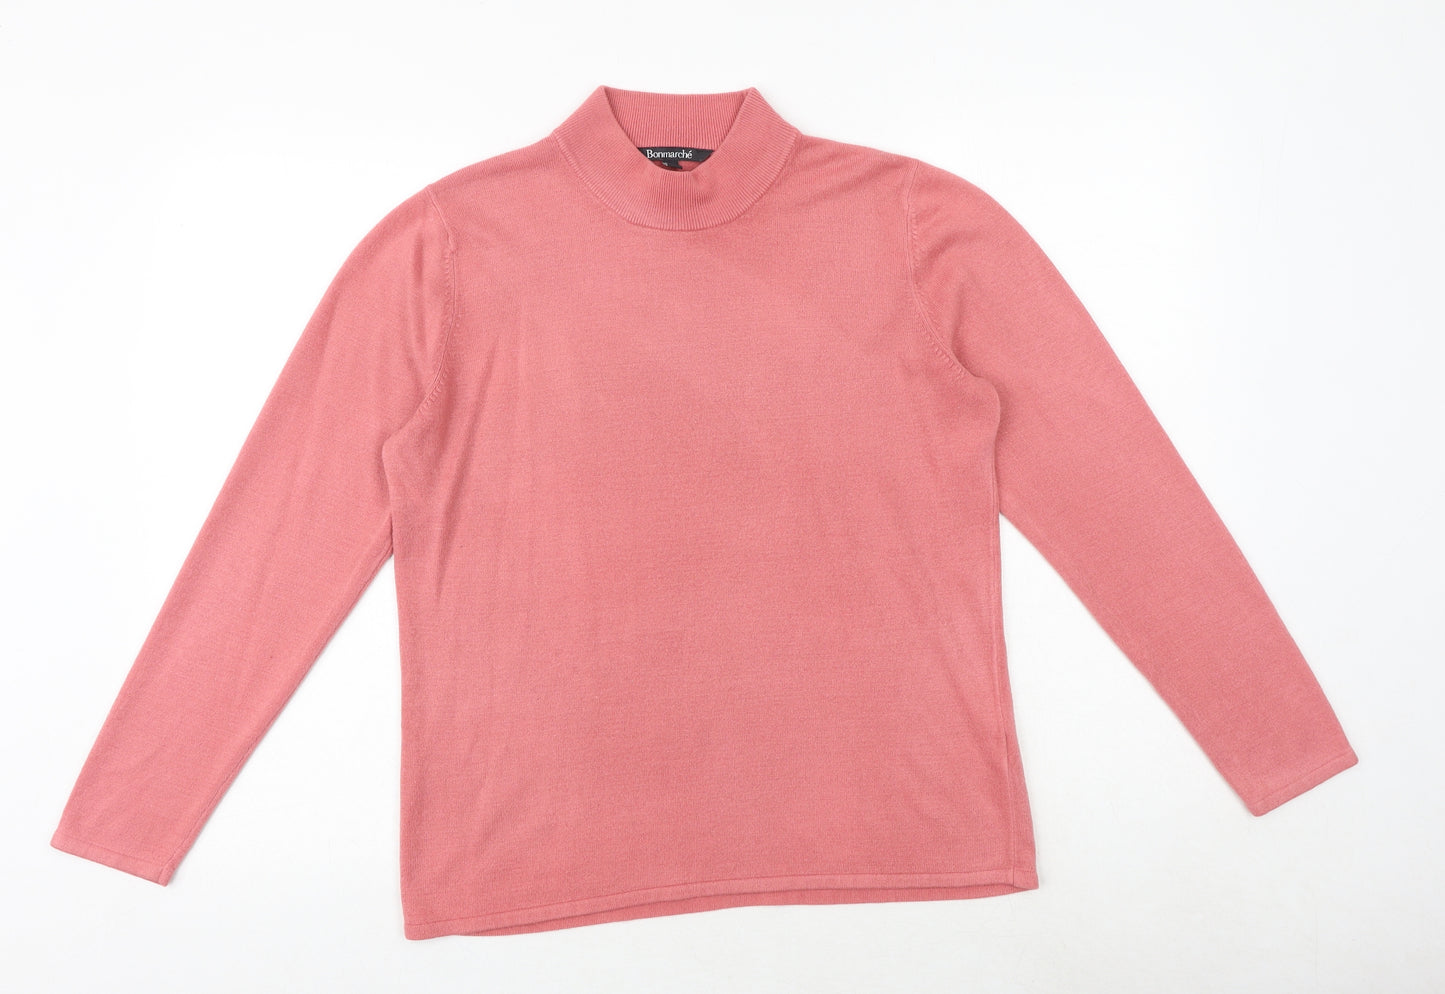 Bonmarché Womens Pink Mock Neck Acrylic Pullover Jumper Size 18 - Size 16-18